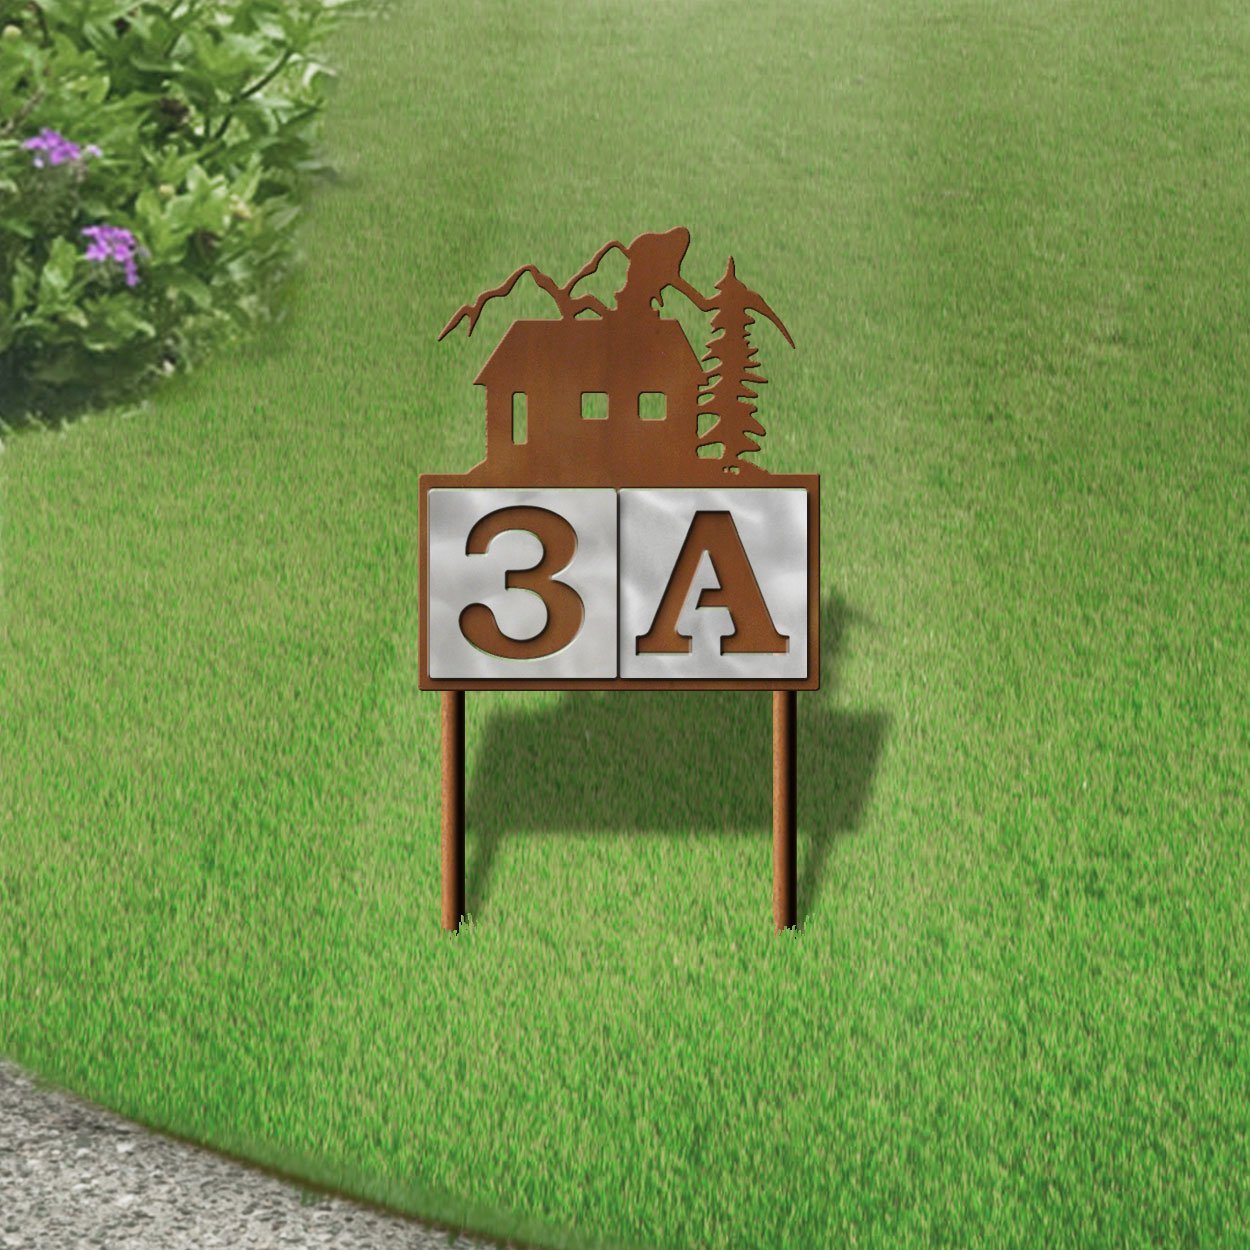 610072 - Cabin in the Woods Design 2-Digit Horizontal 6-inch Tile Outdoor House Numbers Yard Sign